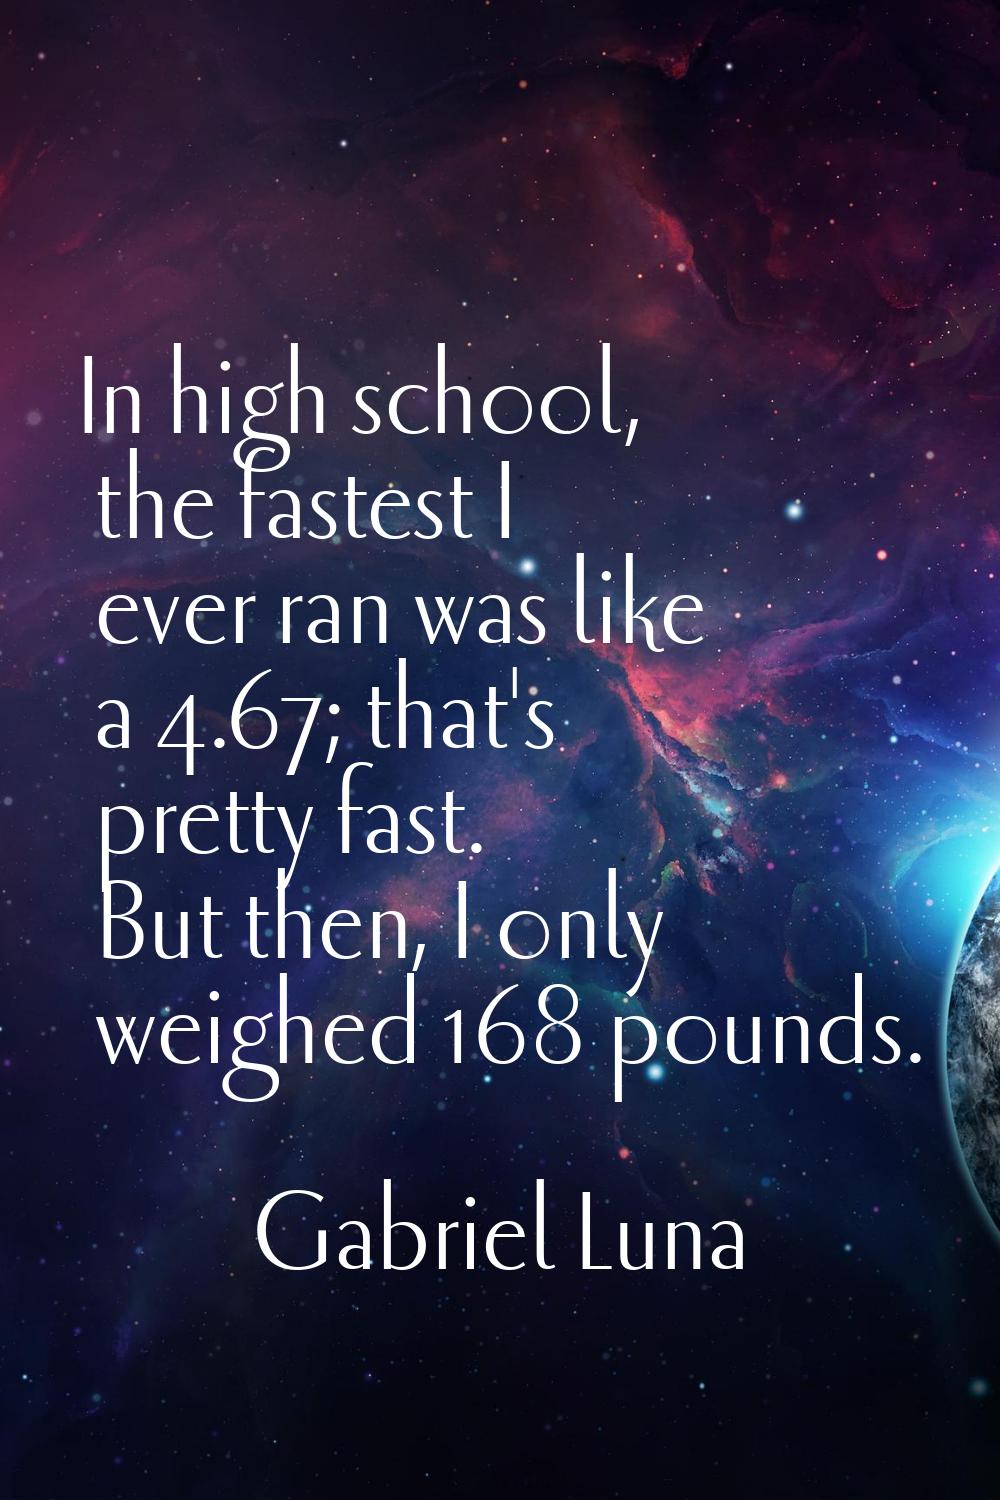 In high school, the fastest I ever ran was like a 4.67; that's pretty fast. But then, I only weighe